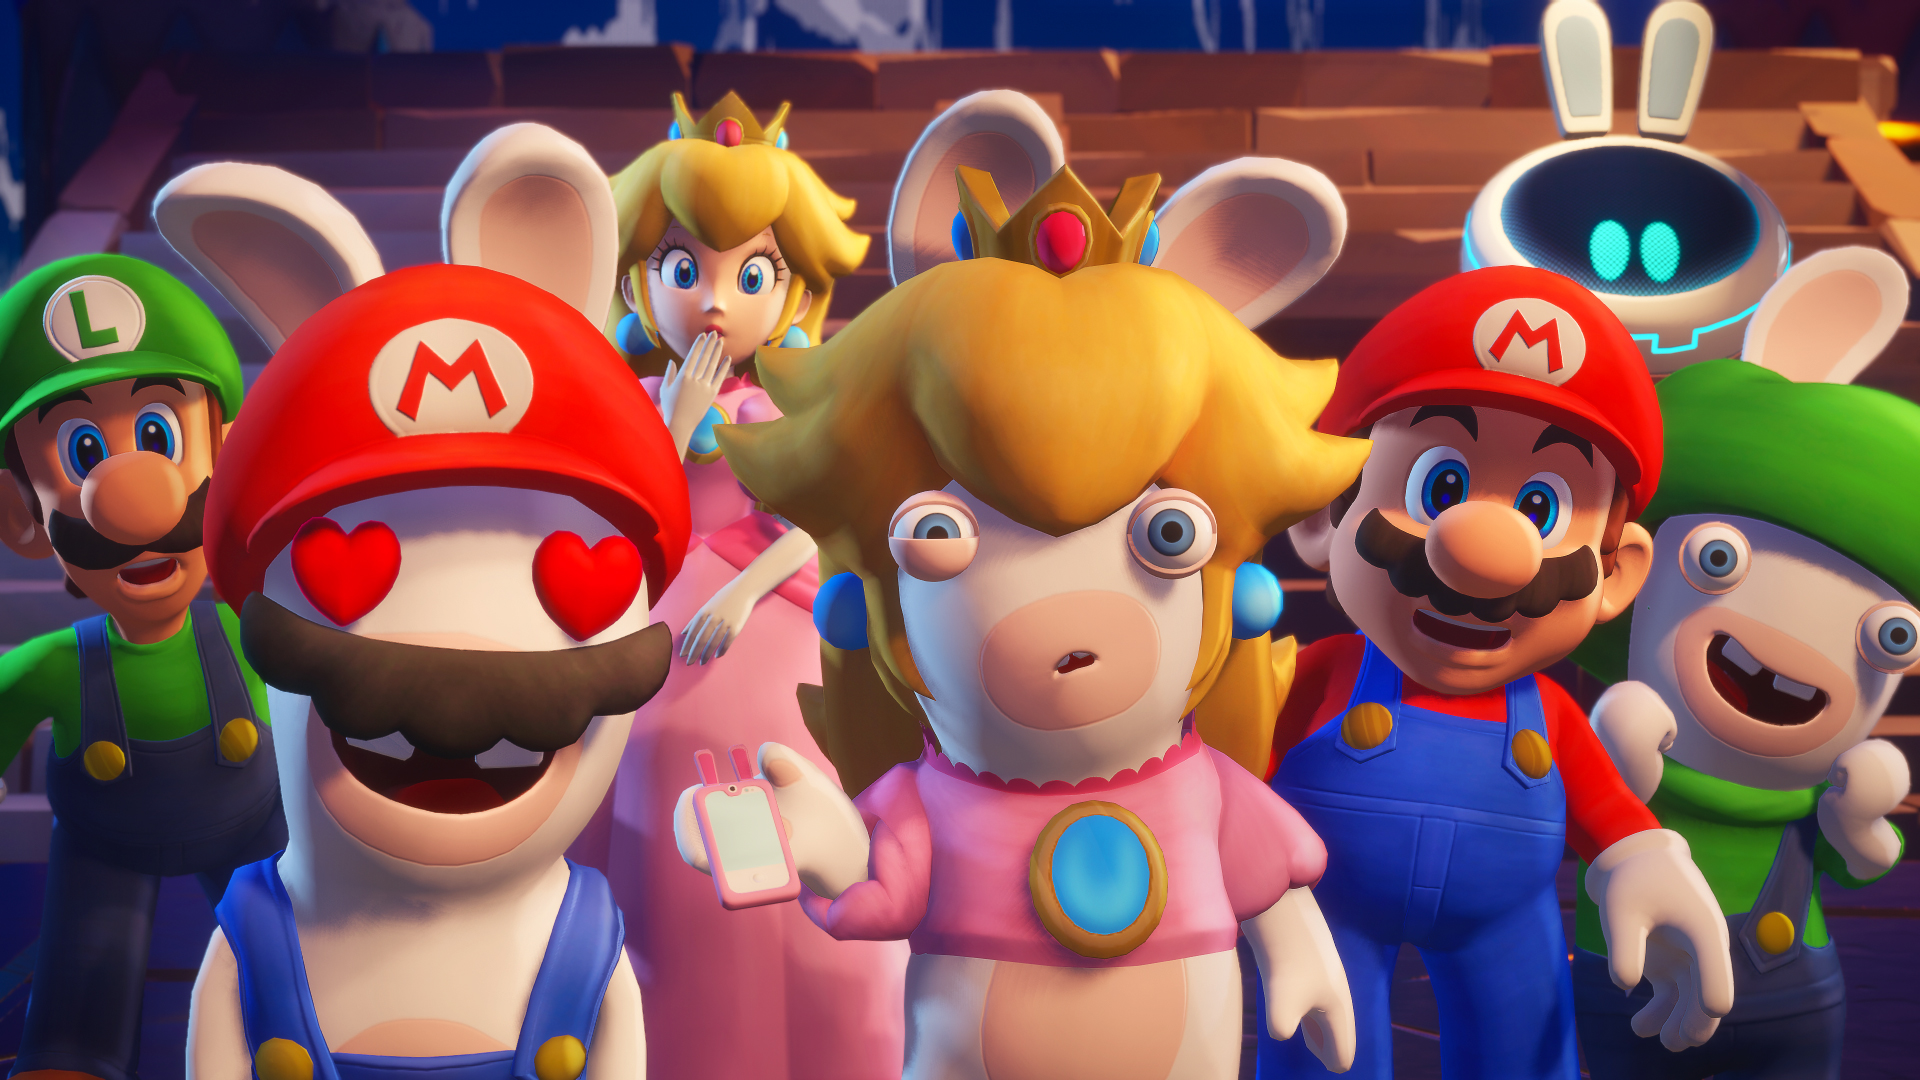 Mario + Rabbids: Sparks of Hope is doing away with the grid and opening up the Galaxy